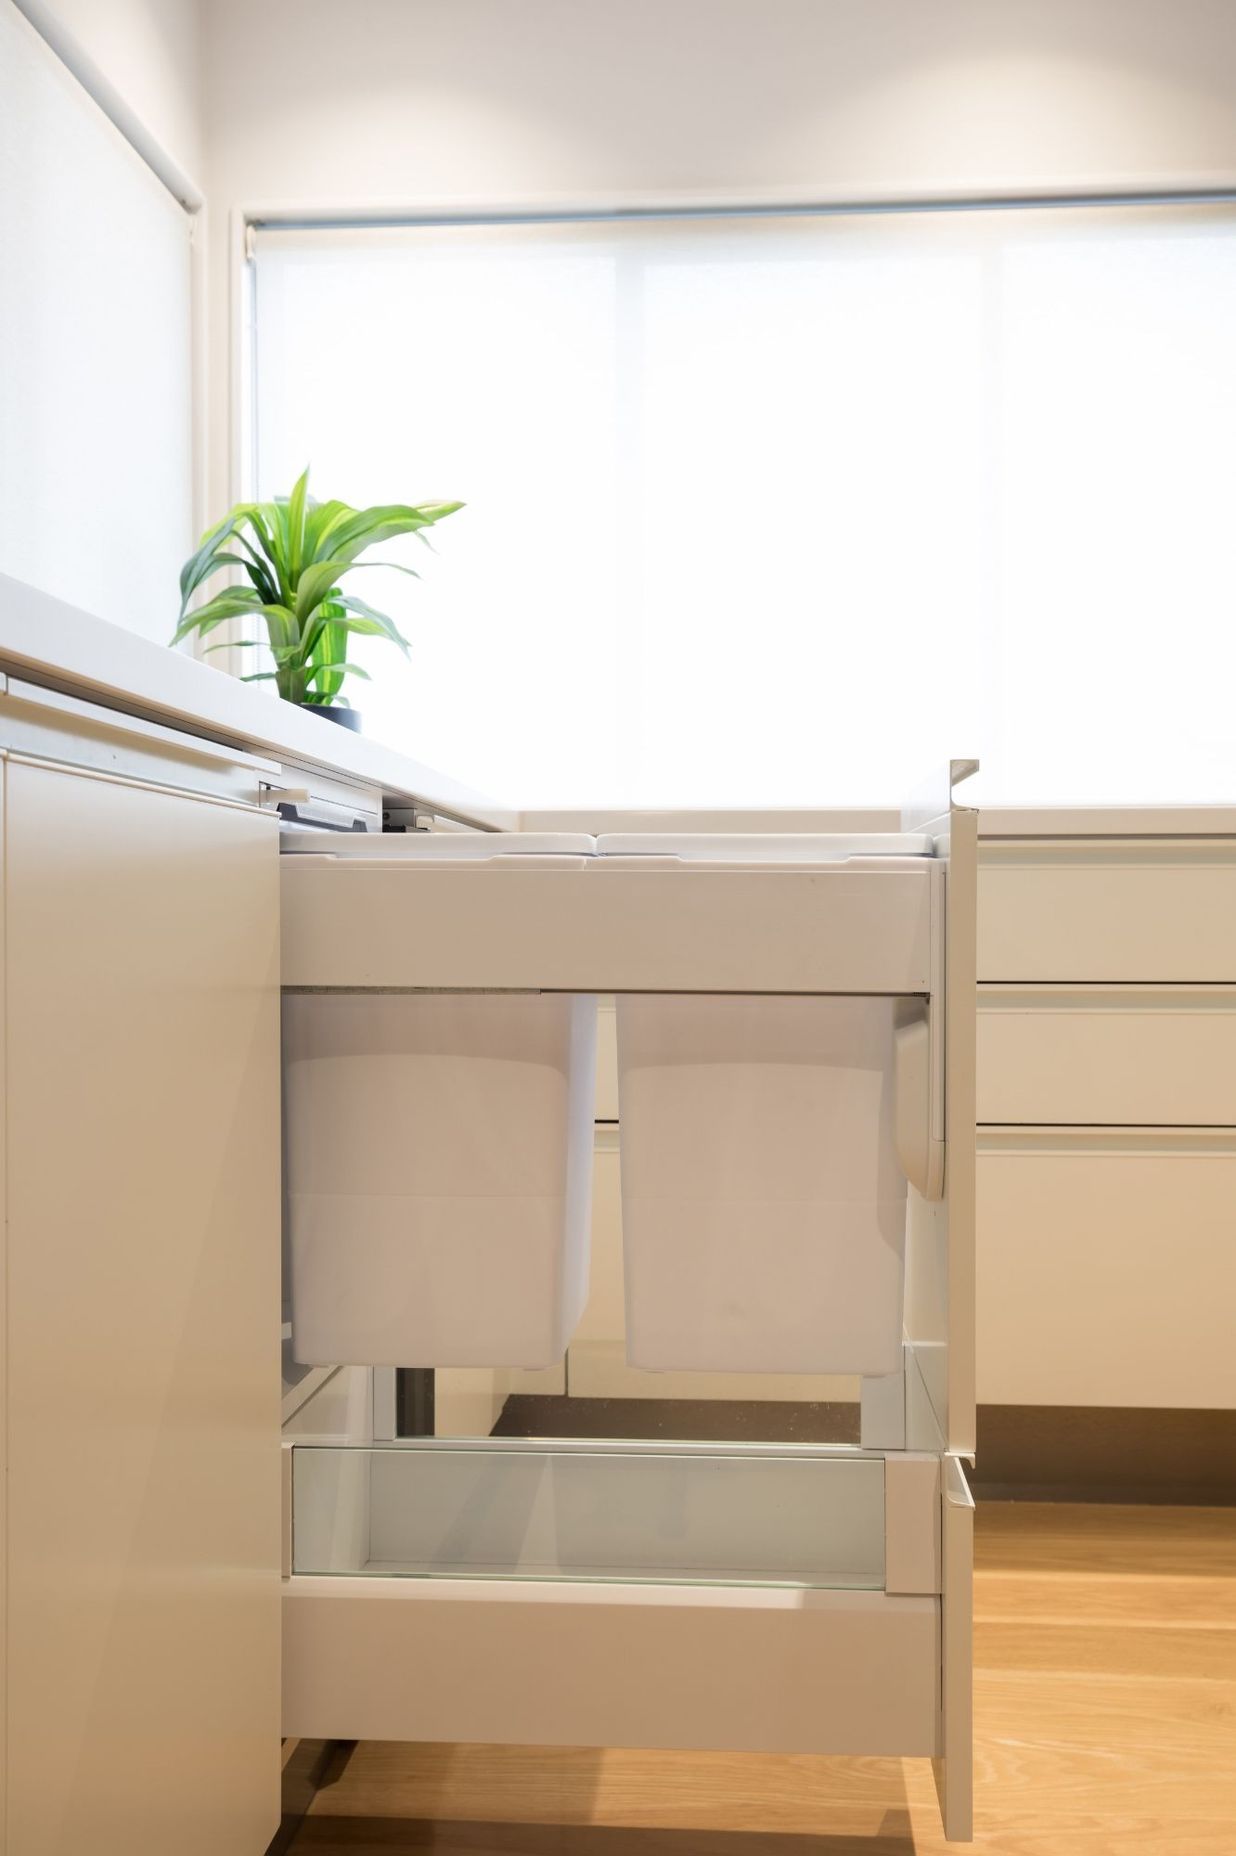 Concelo in Arctic White is the perfect compliment to premium drawer systems in White